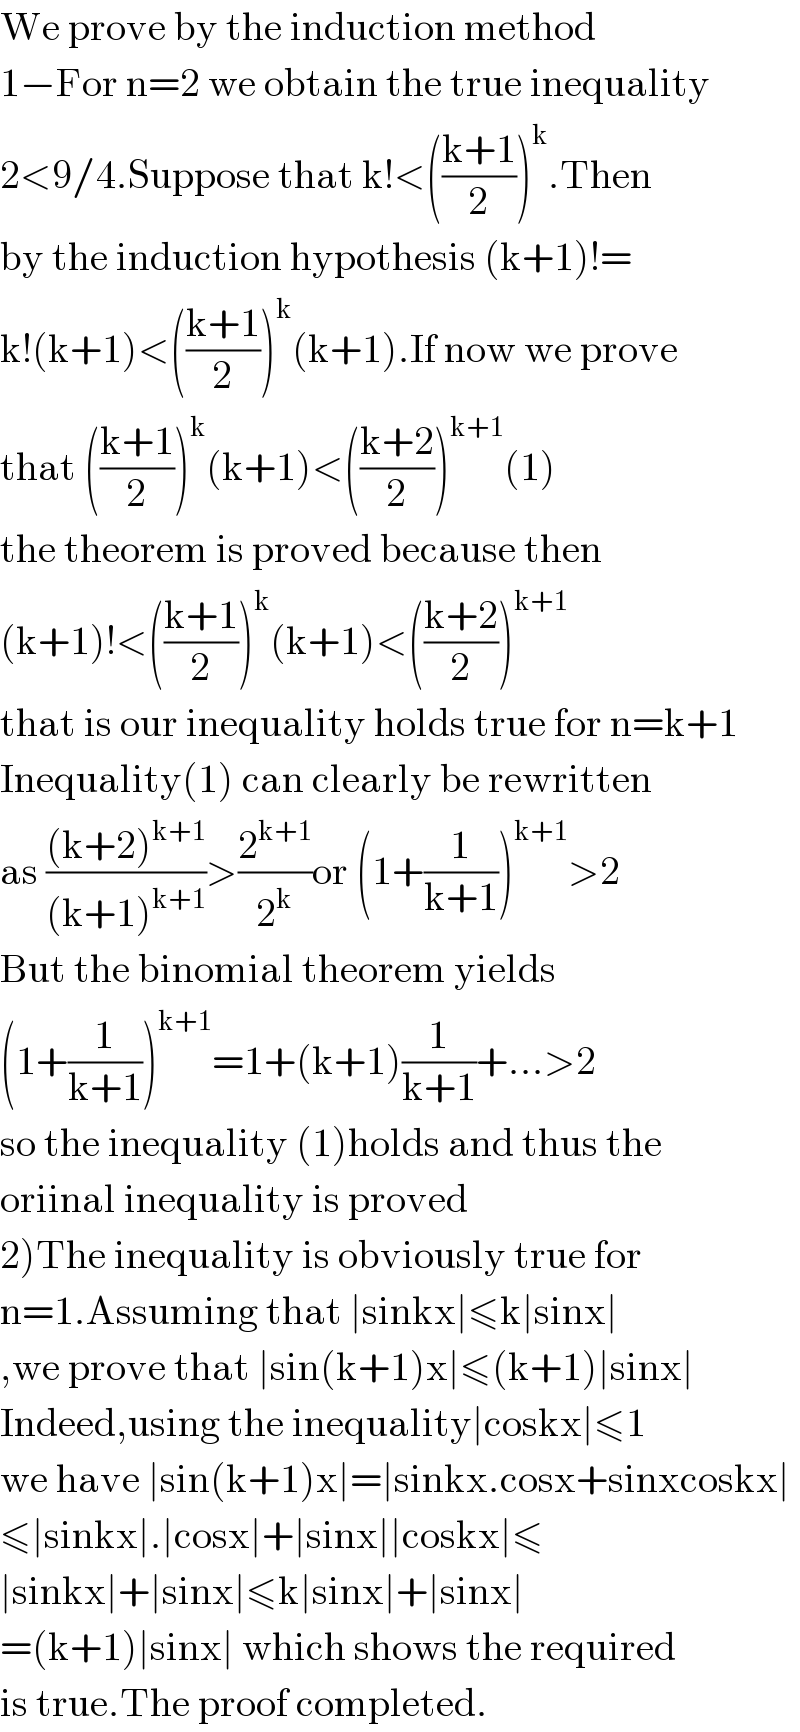 We prove by the induction method  1−For n=2 we obtain the true inequality  2<9/4.Suppose that k!<(((k+1)/2))^k .Then  by the induction hypothesis (k+1)!=  k!(k+1)<(((k+1)/2))^k (k+1).If now we prove  that (((k+1)/2))^k (k+1)<(((k+2)/2))^(k+1) (1)  the theorem is proved because then  (k+1)!<(((k+1)/2))^k (k+1)<(((k+2)/2))^(k+1)   that is our inequality holds true for n=k+1  Inequality(1) can clearly be rewritten  as (((k+2)^(k+1) )/((k+1)^(k+1) ))>(2^(k+1) /2^k )or (1+(1/(k+1)))^(k+1) >2  But the binomial theorem yields  (1+(1/(k+1)))^(k+1) =1+(k+1)(1/(k+1))+...>2  so the inequality (1)holds and thus the   oriinal inequality is proved  2)The inequality is obviously true for  n=1.Assuming that ∣sinkx∣≤k∣sinx∣  ,we prove that ∣sin(k+1)x∣≤(k+1)∣sinx∣  Indeed,using the inequality∣coskx∣≤1  we have ∣sin(k+1)x∣=∣sinkx.cosx+sinxcoskx∣  ≤∣sinkx∣.∣cosx∣+∣sinx∣∣coskx∣≤  ∣sinkx∣+∣sinx∣≤k∣sinx∣+∣sinx∣  =(k+1)∣sinx∣ which shows the required  is true.The proof completed.  